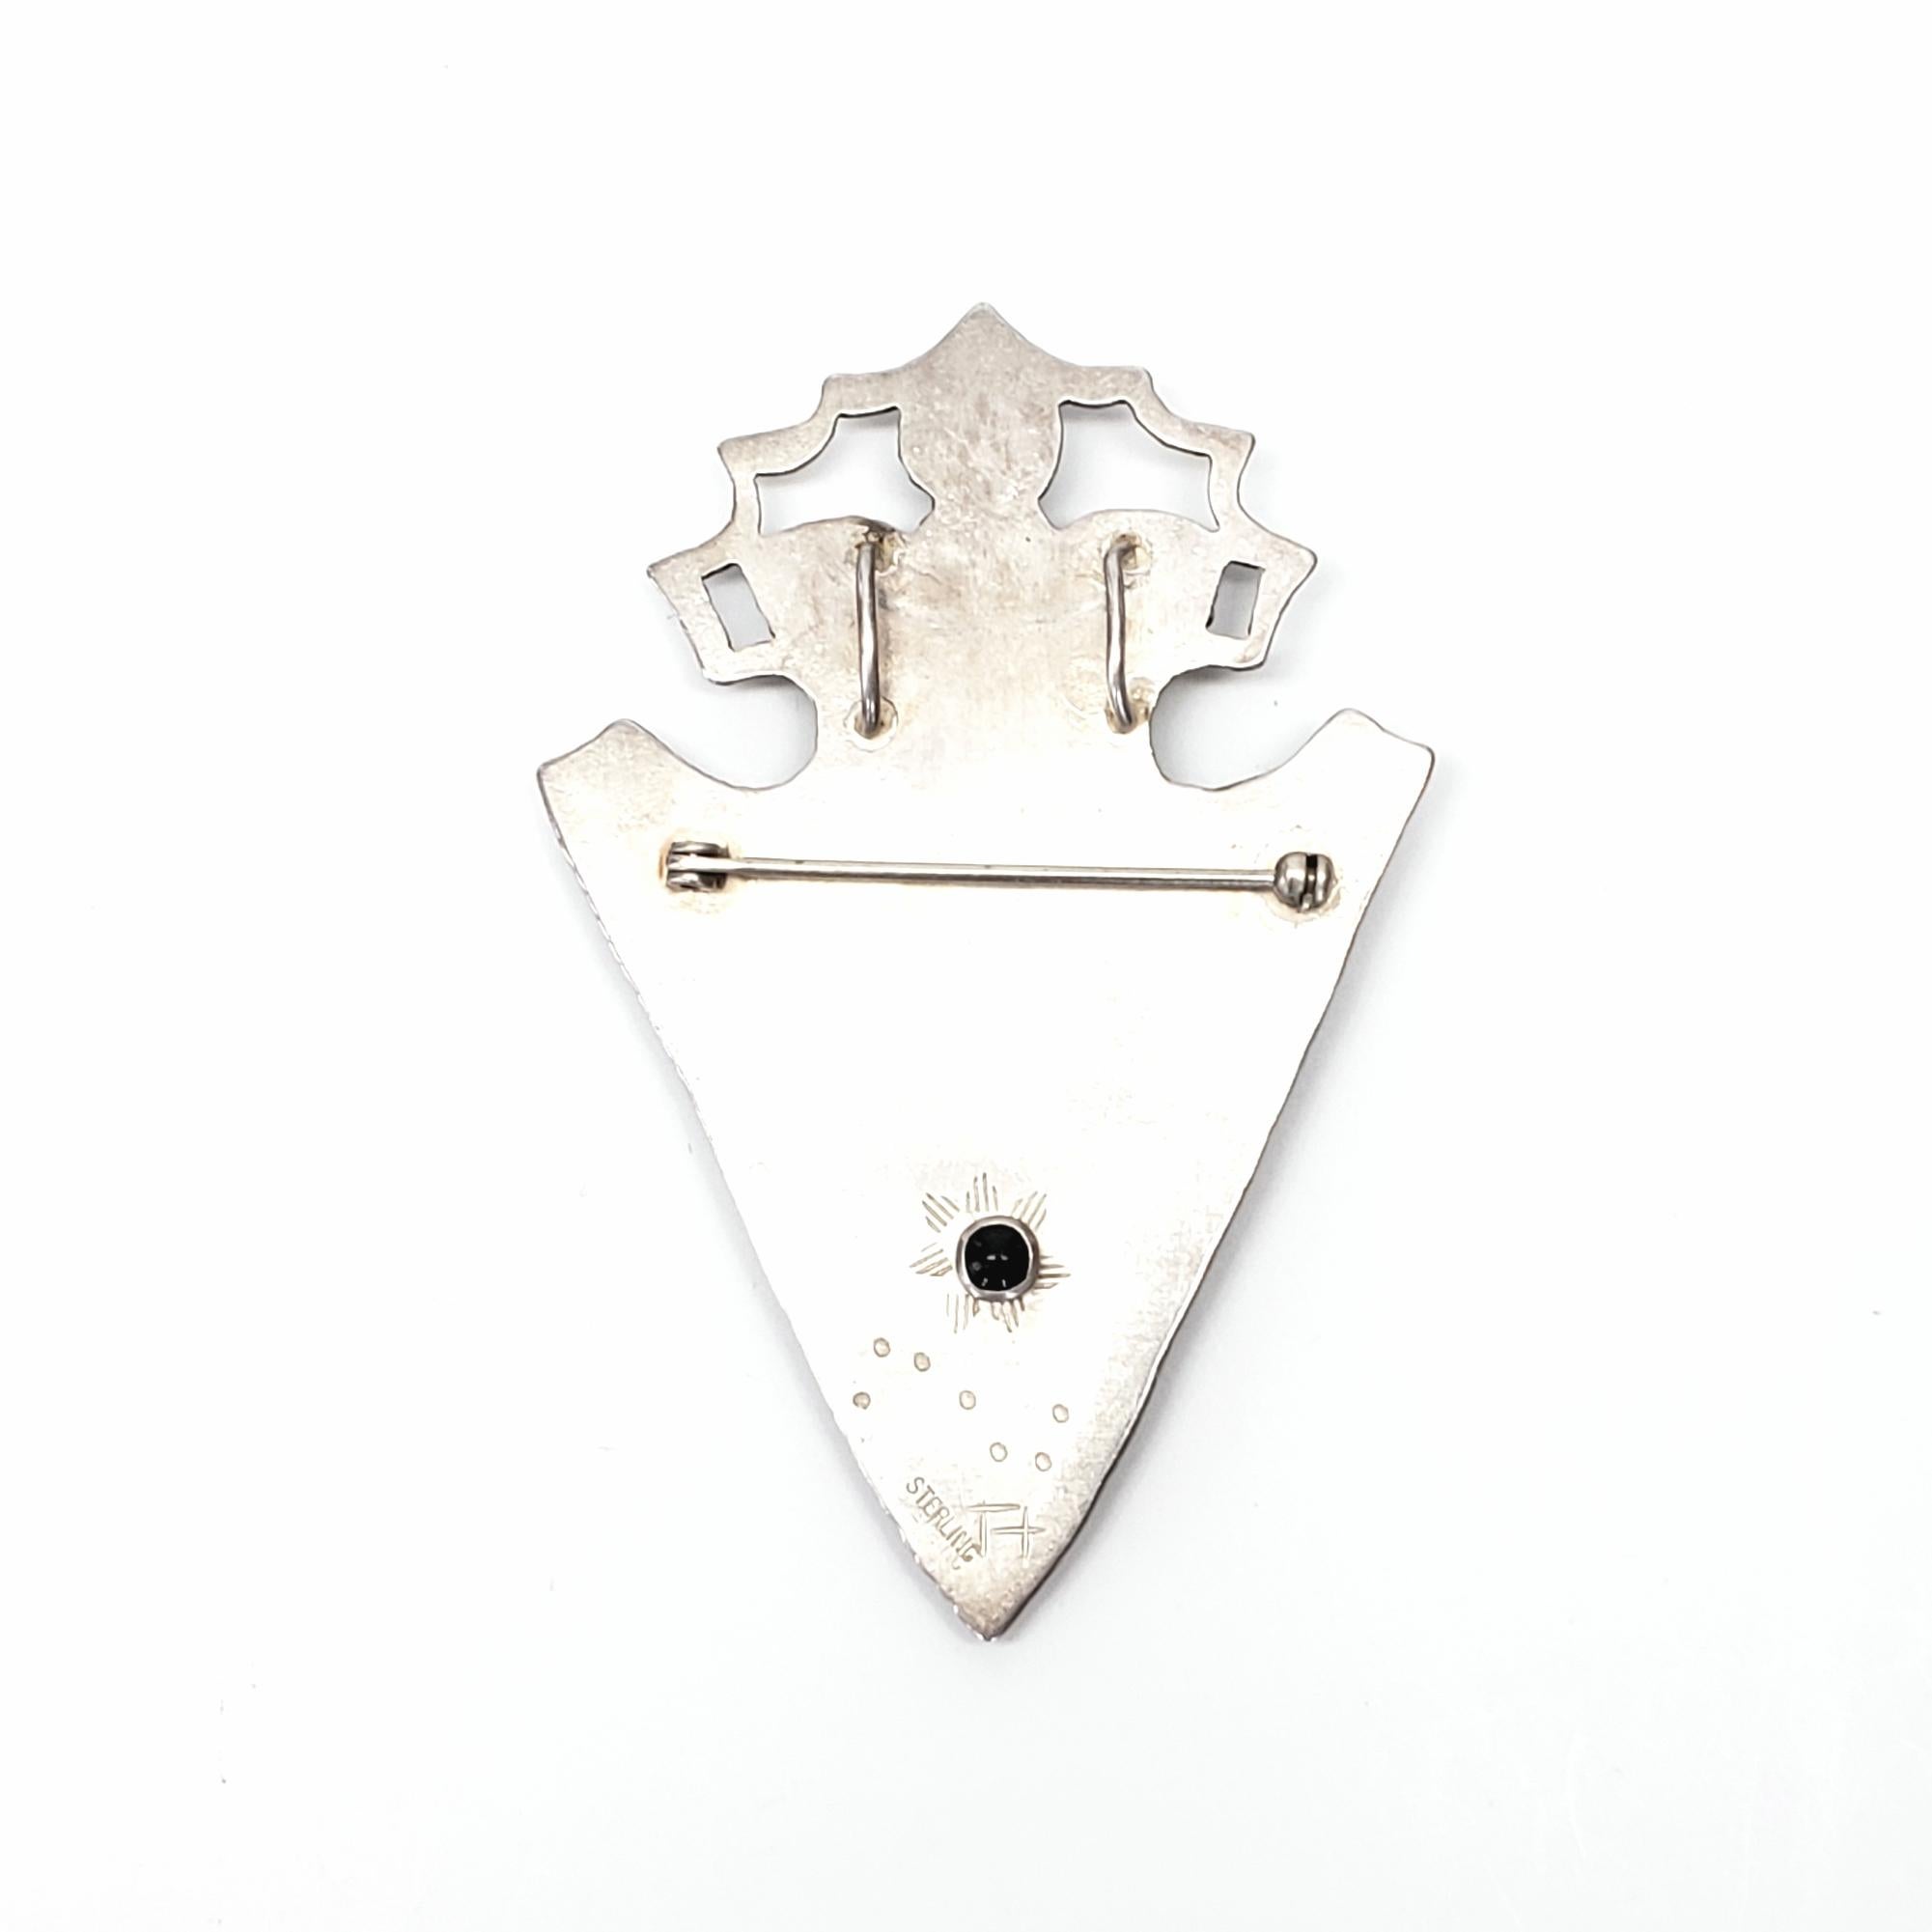 Sterling silver and agate arrowhead pin/pendant by Native American Hopi artisan.

Beautiful piece can be worn as a pin or pendant, features large triangular banded agate  - possibly from Keneenaco Point, Michigan, tear drop druzy and round